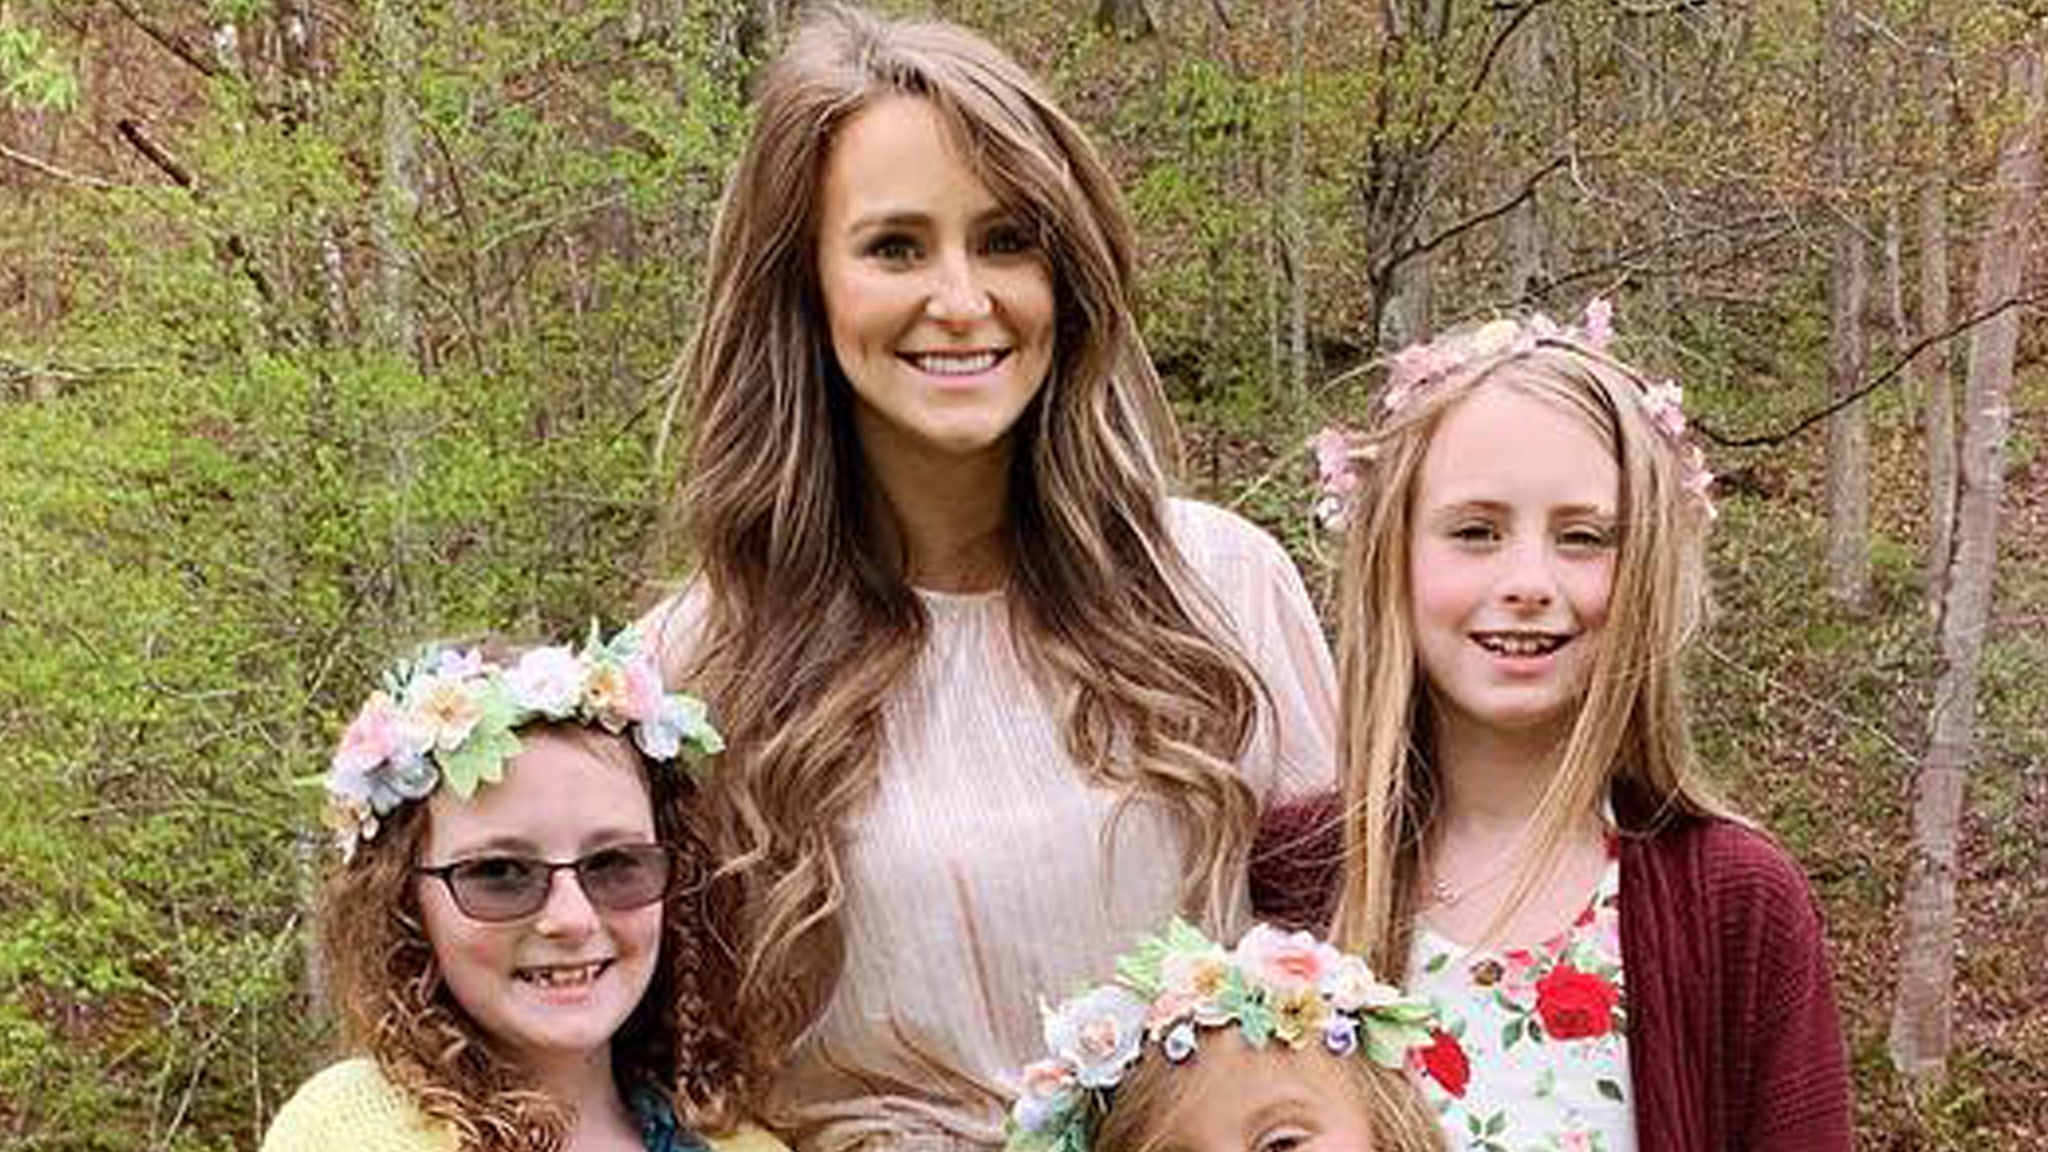 Leah Messer Says Rehab Helped 'Unwind Toxic Patterns' She Was 'Passing